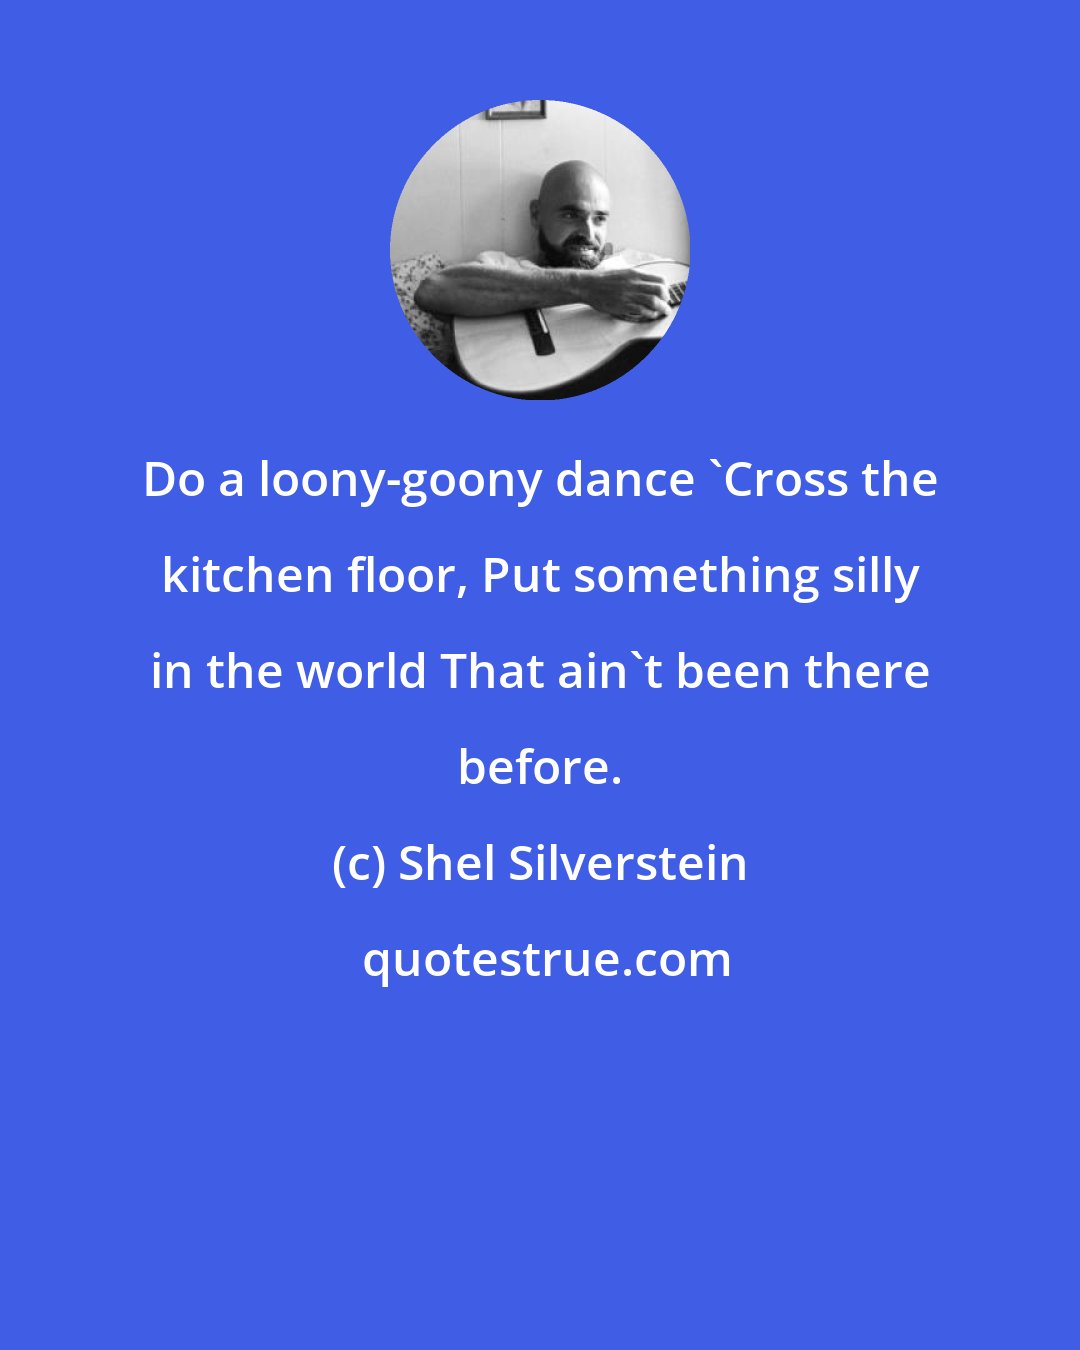 Shel Silverstein: Do a loony-goony dance 'Cross the kitchen floor, Put something silly in the world That ain't been there before.